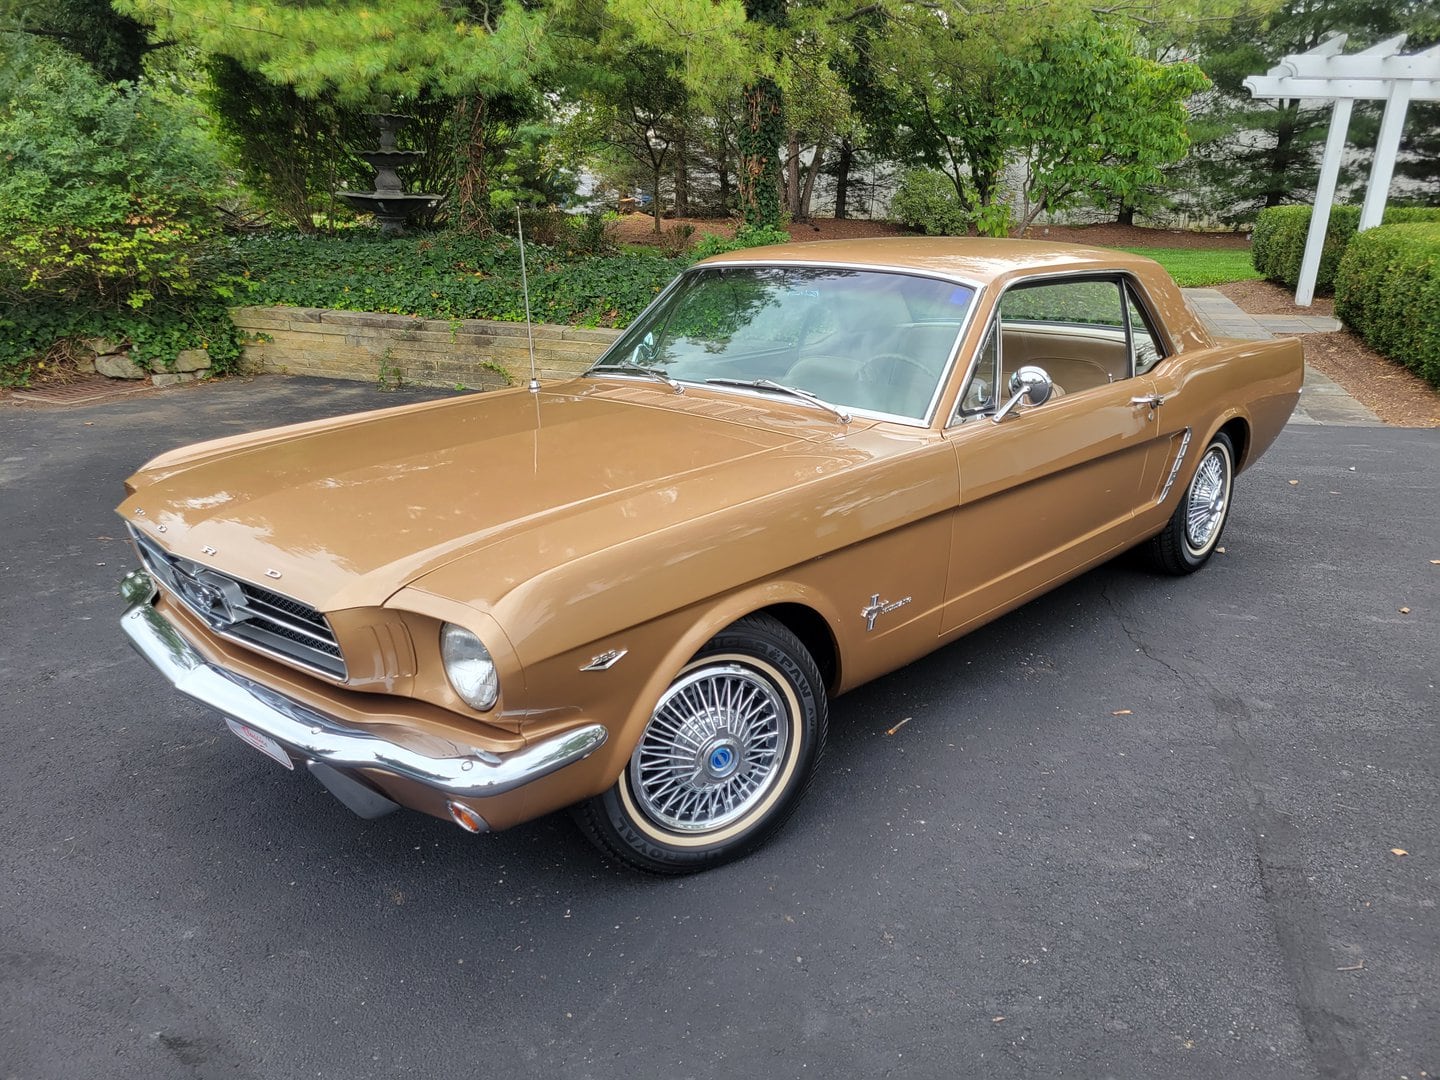 A 1965 tan Ford Mustang is parked in a driveway.